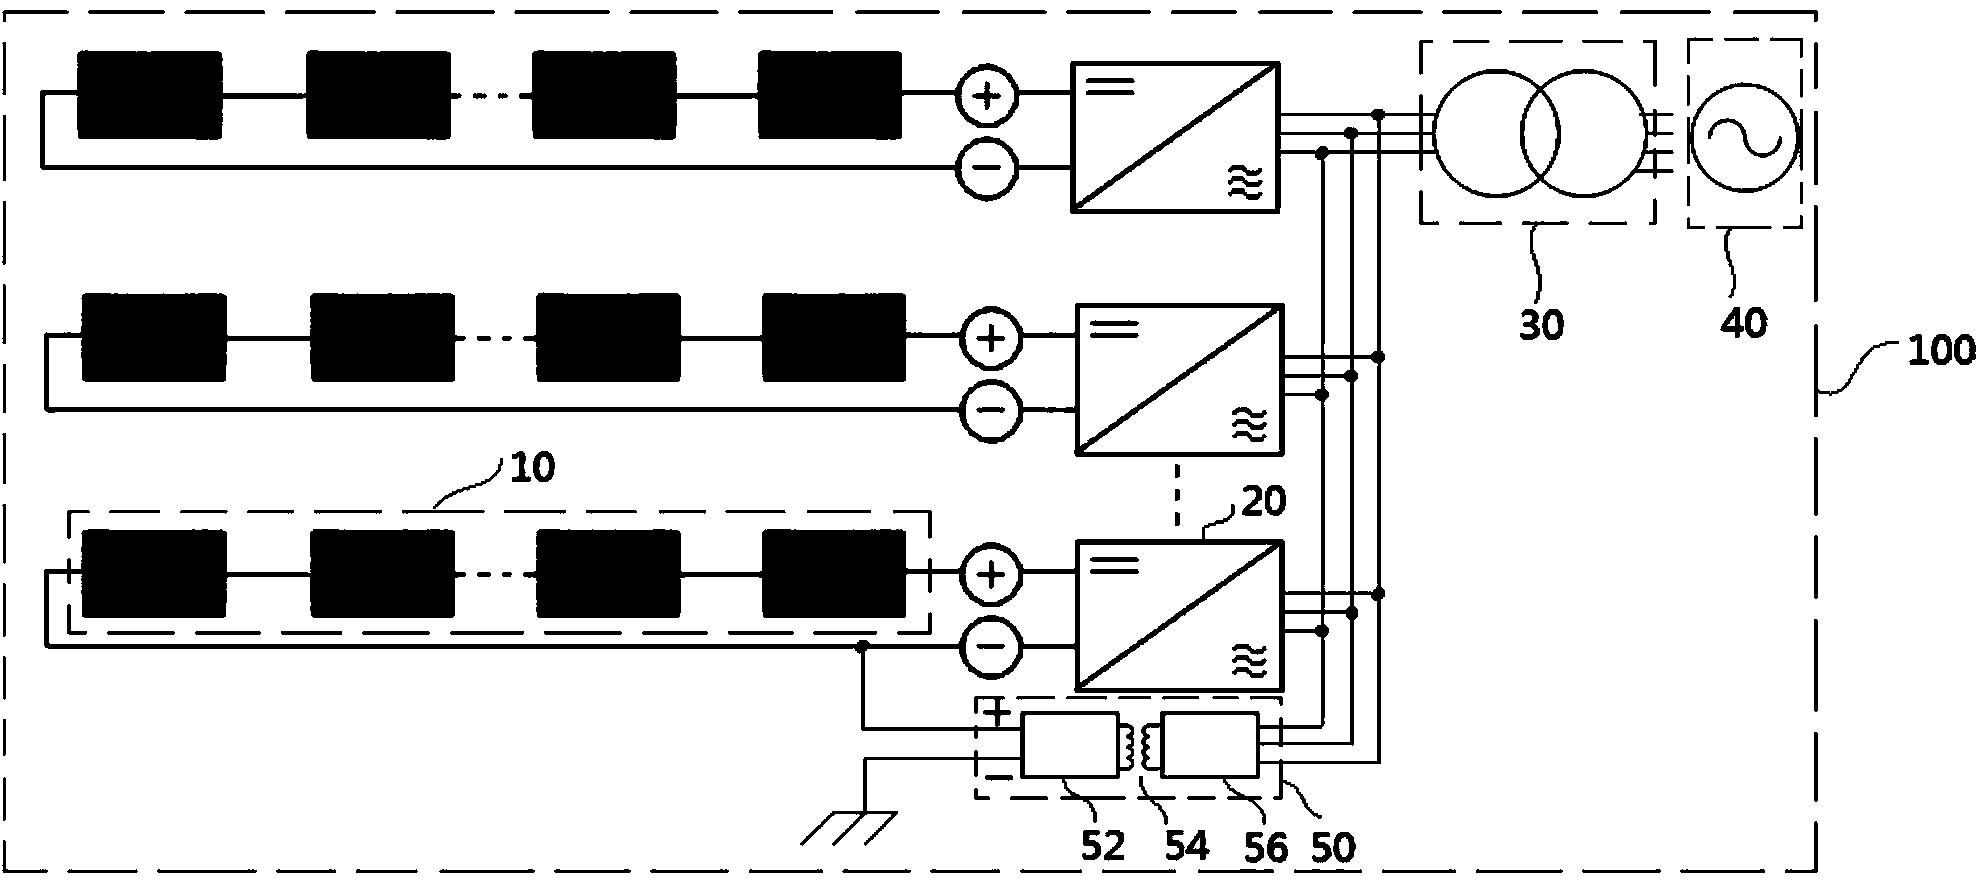 Photovoltaic power supply system